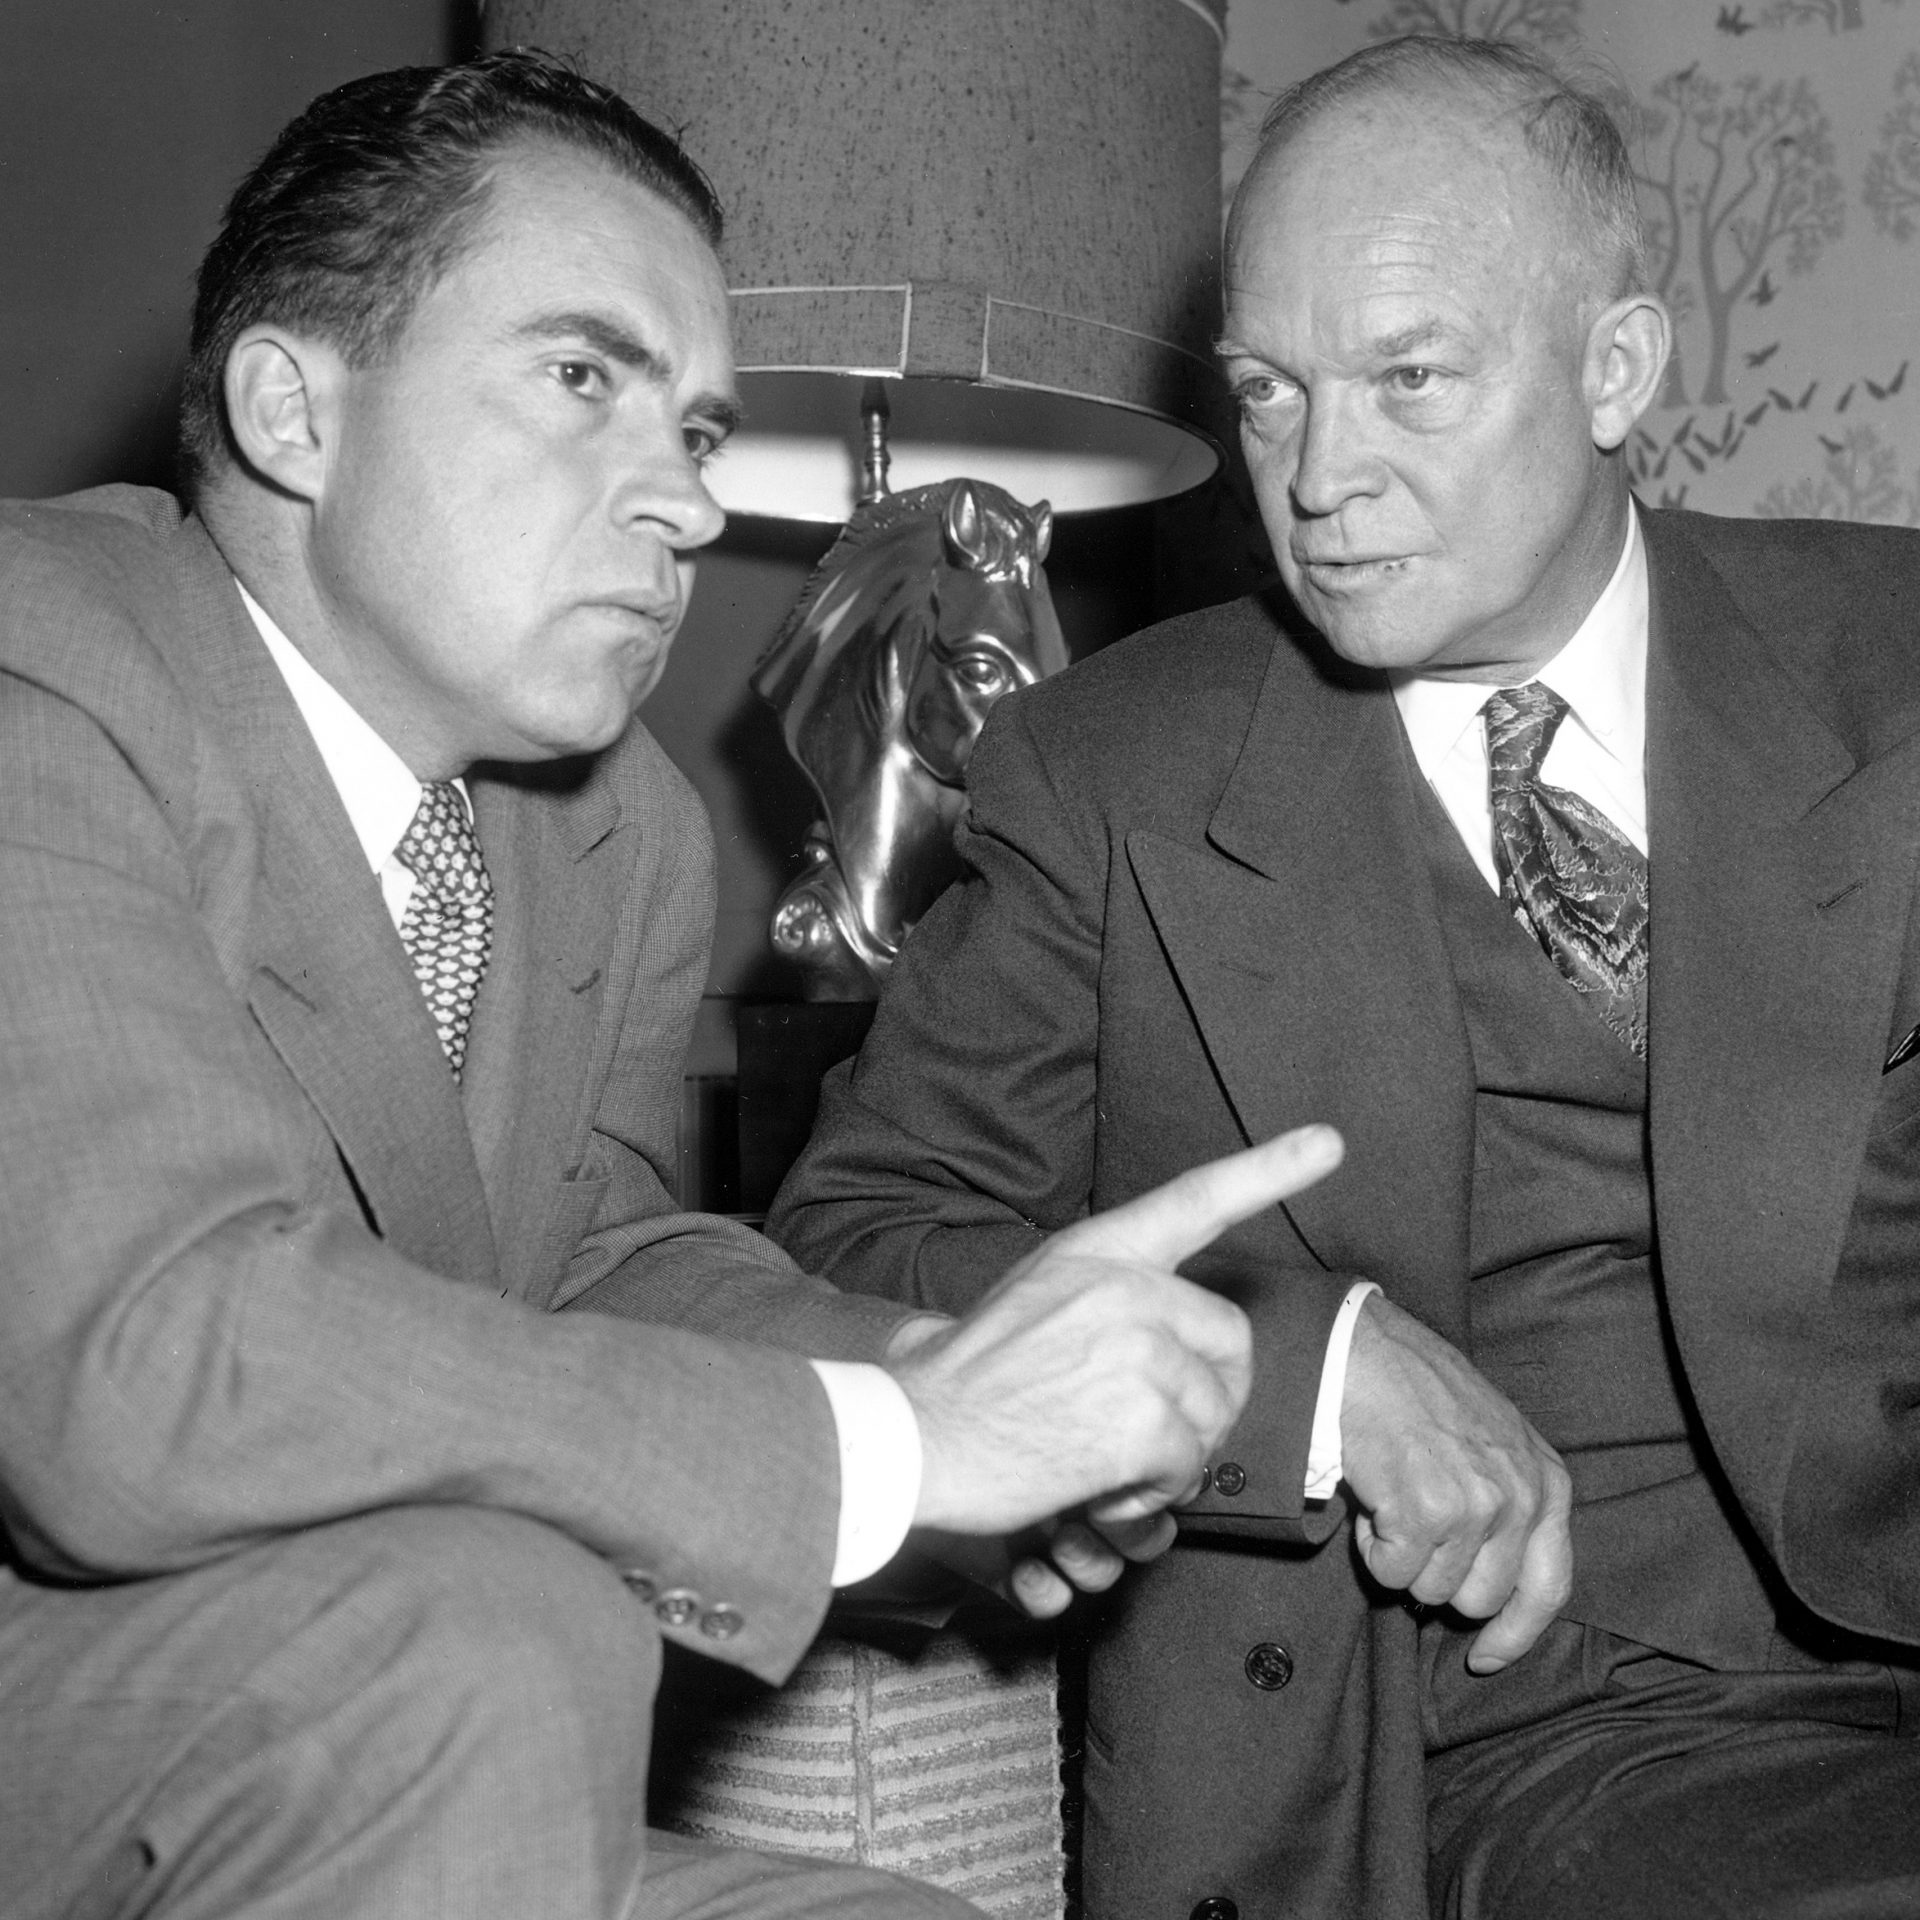 President Dwight Eisenhower's medical problems led to an agreement with his vice president, Richard Nixon, to transfer executive power in the event of presidential incapacity.